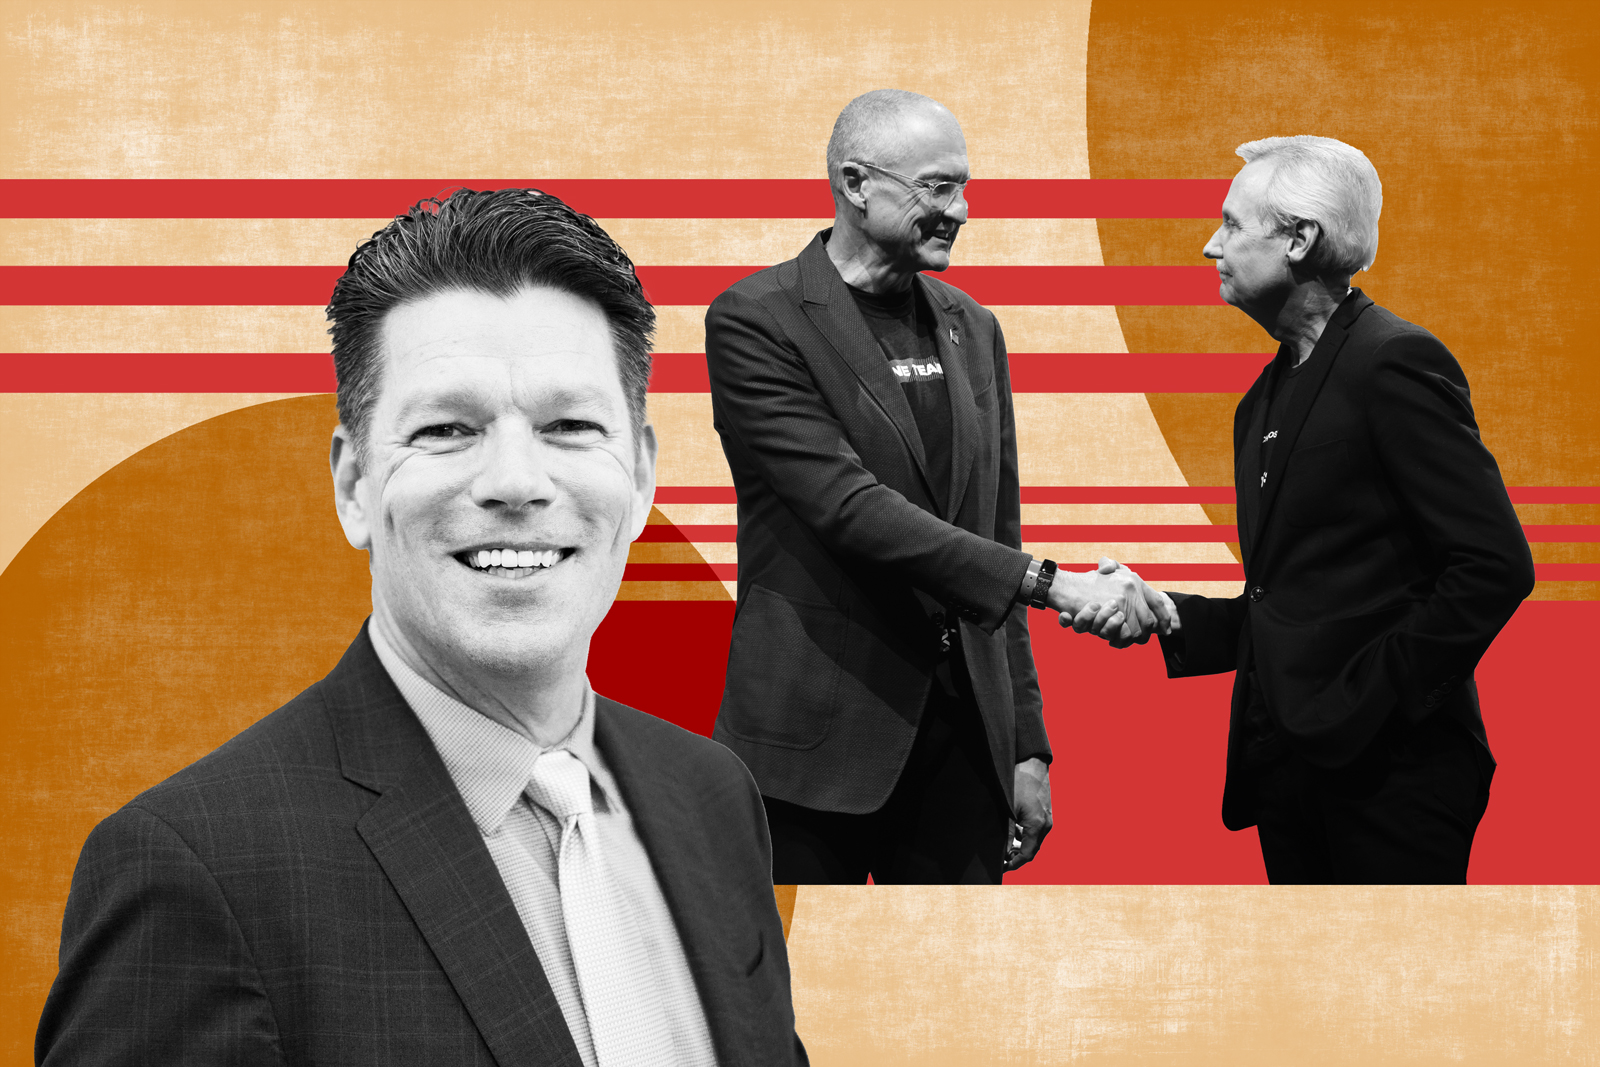 From left to right: Keller Williams president Marc King, Carl Liebert, CEO of KWx, the parent holding company of KW and Gary Keller, executive chairman, KWx and Keller Williams. (Keller Williams/Illustration by Kevin Rebong for The Real Deal)